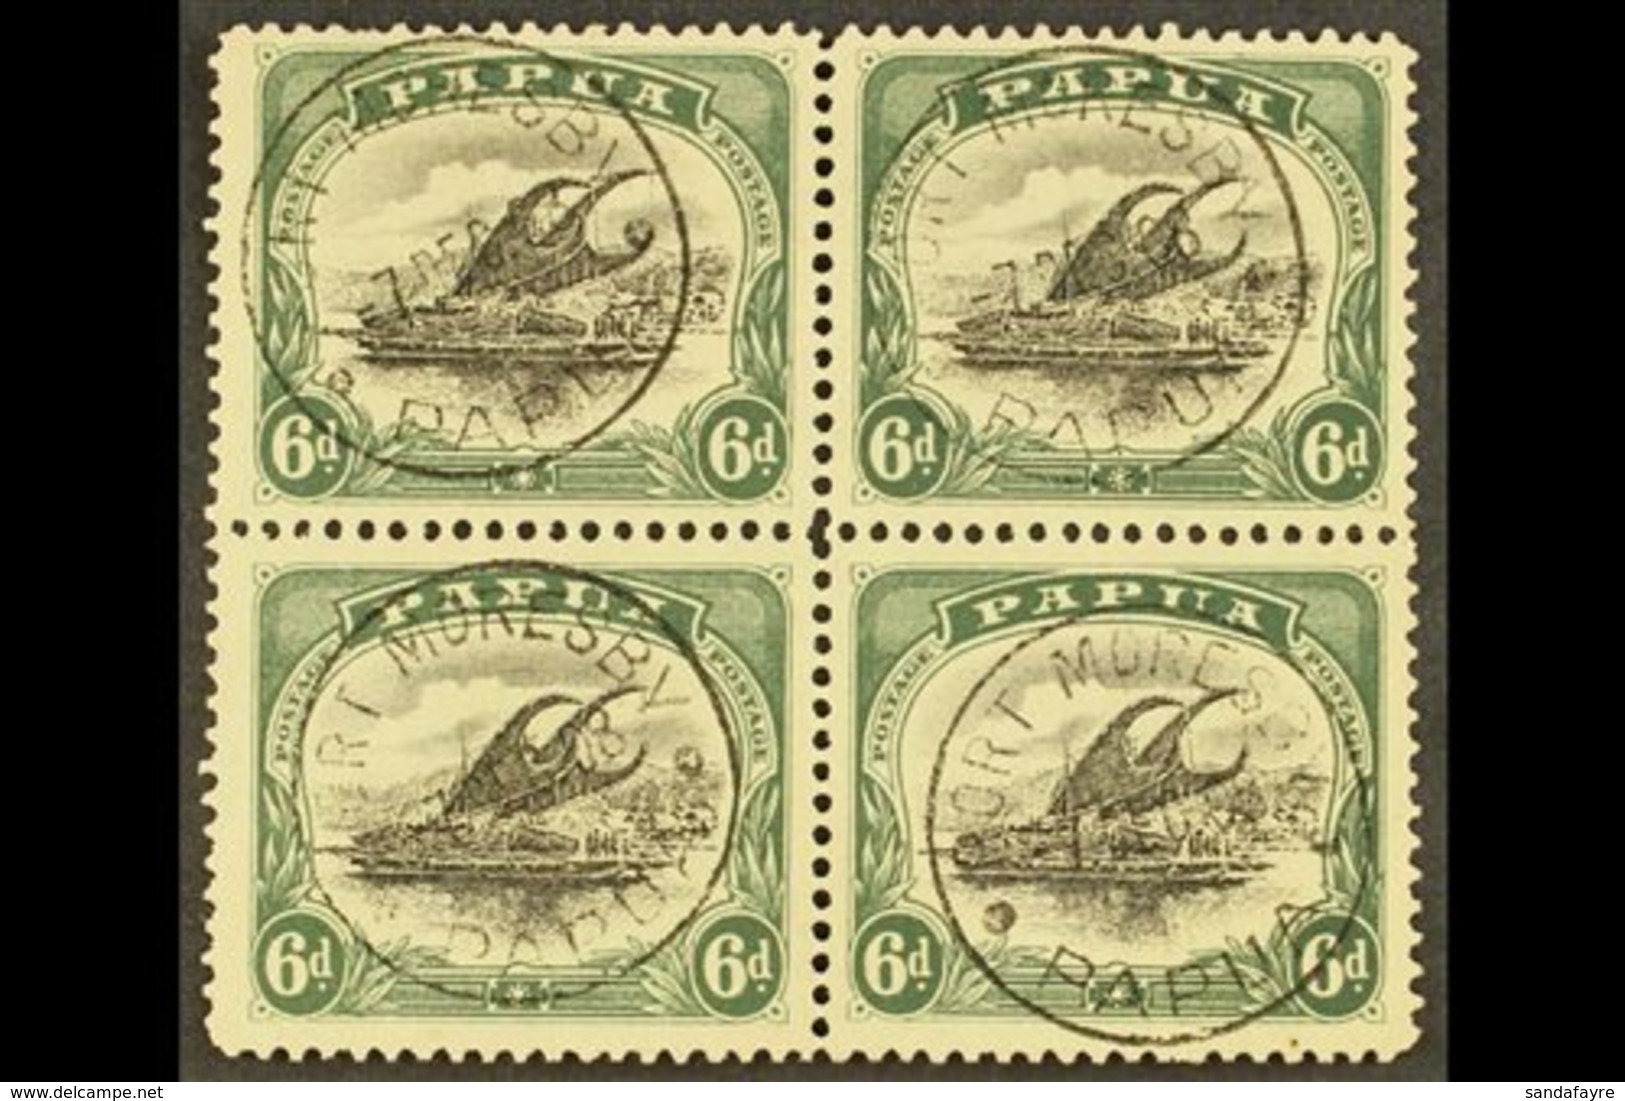 1907-98 Small Papua, Watermark Upright Perf 11 6d Black And Myrtle Green, SG 53, Superb Cds Used Block Of Four, Port Mor - Papouasie-Nouvelle-Guinée